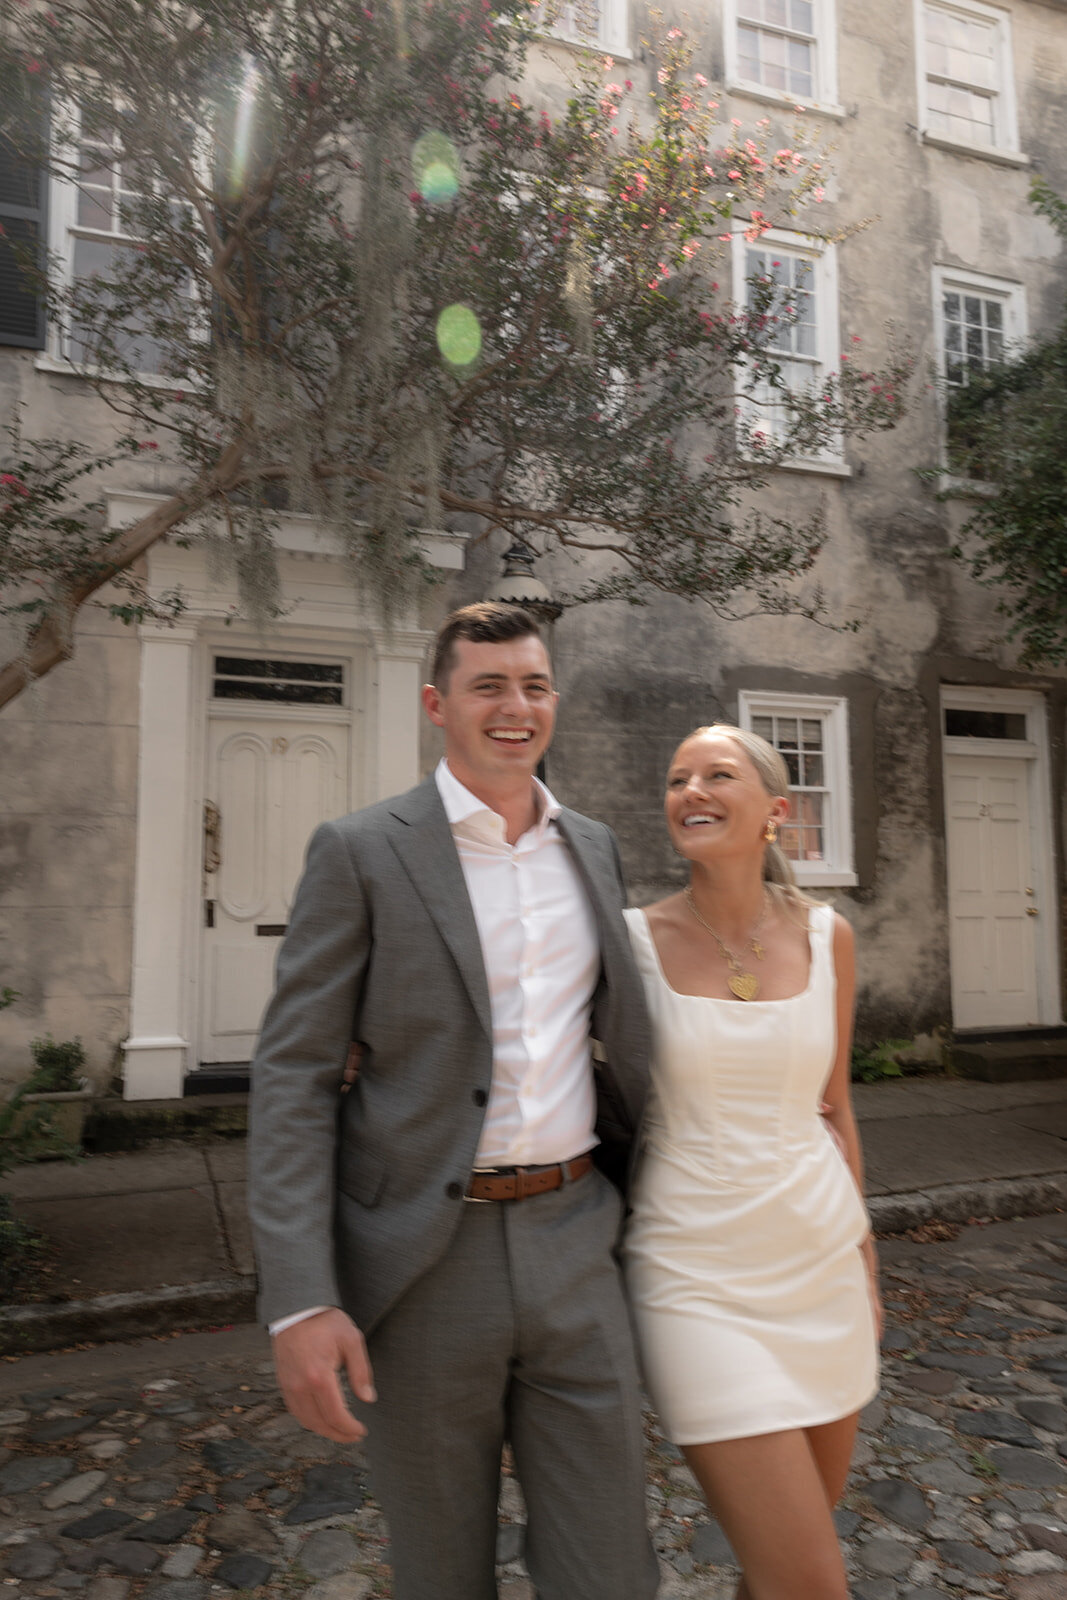 Man in grey suit and woman in white short dress walking on cobblestone street in Charleston for enagagement photos